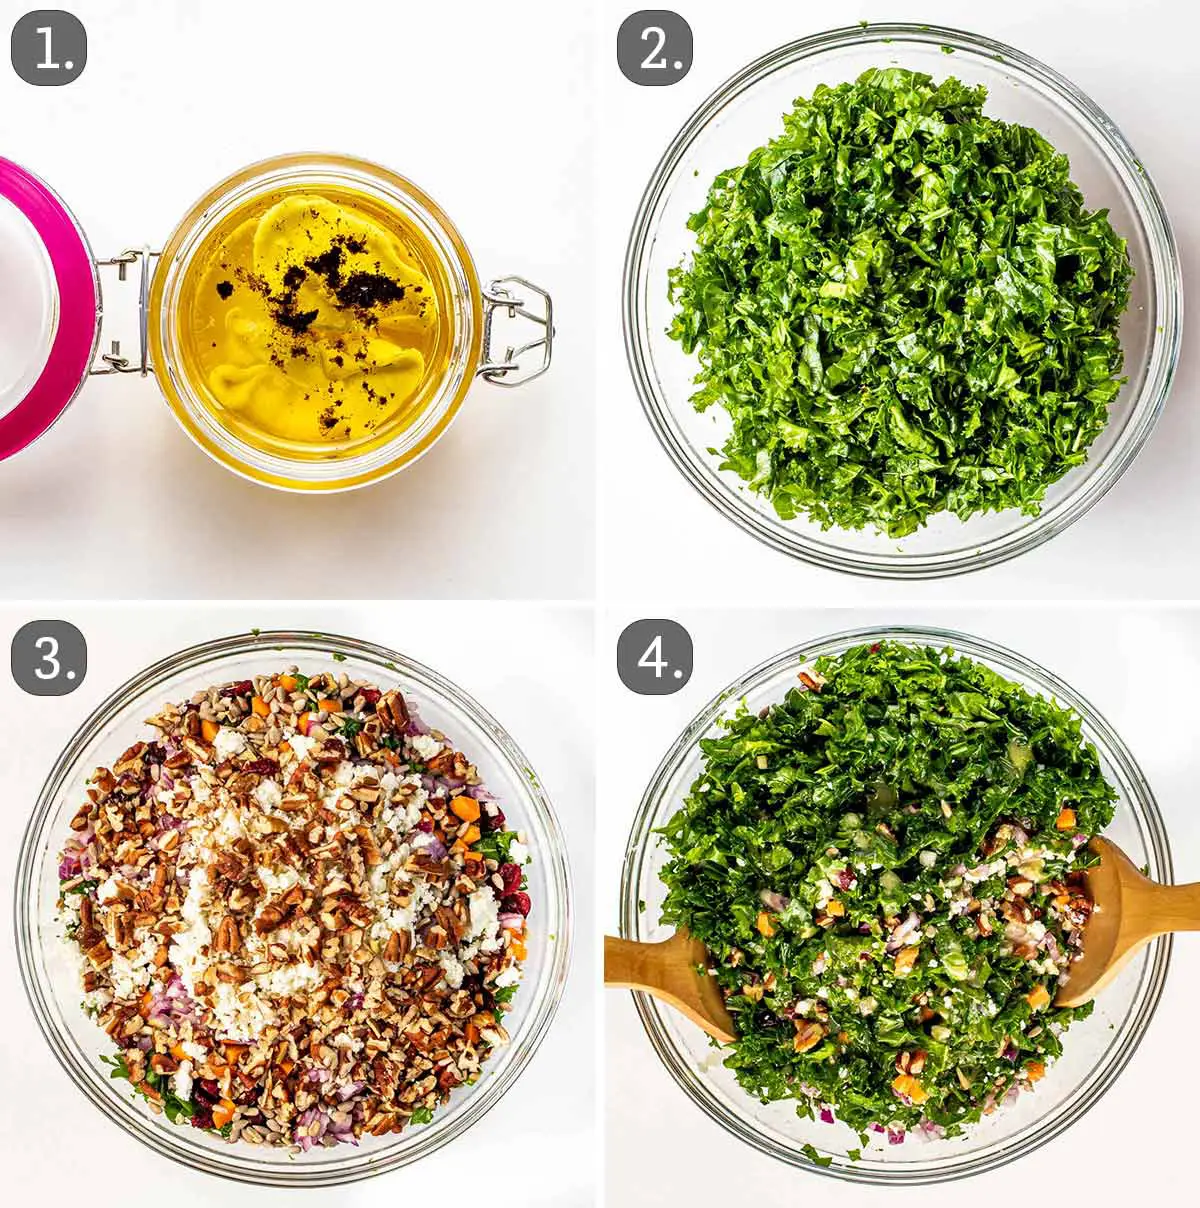 detailed process shots showing how to make kale salad.